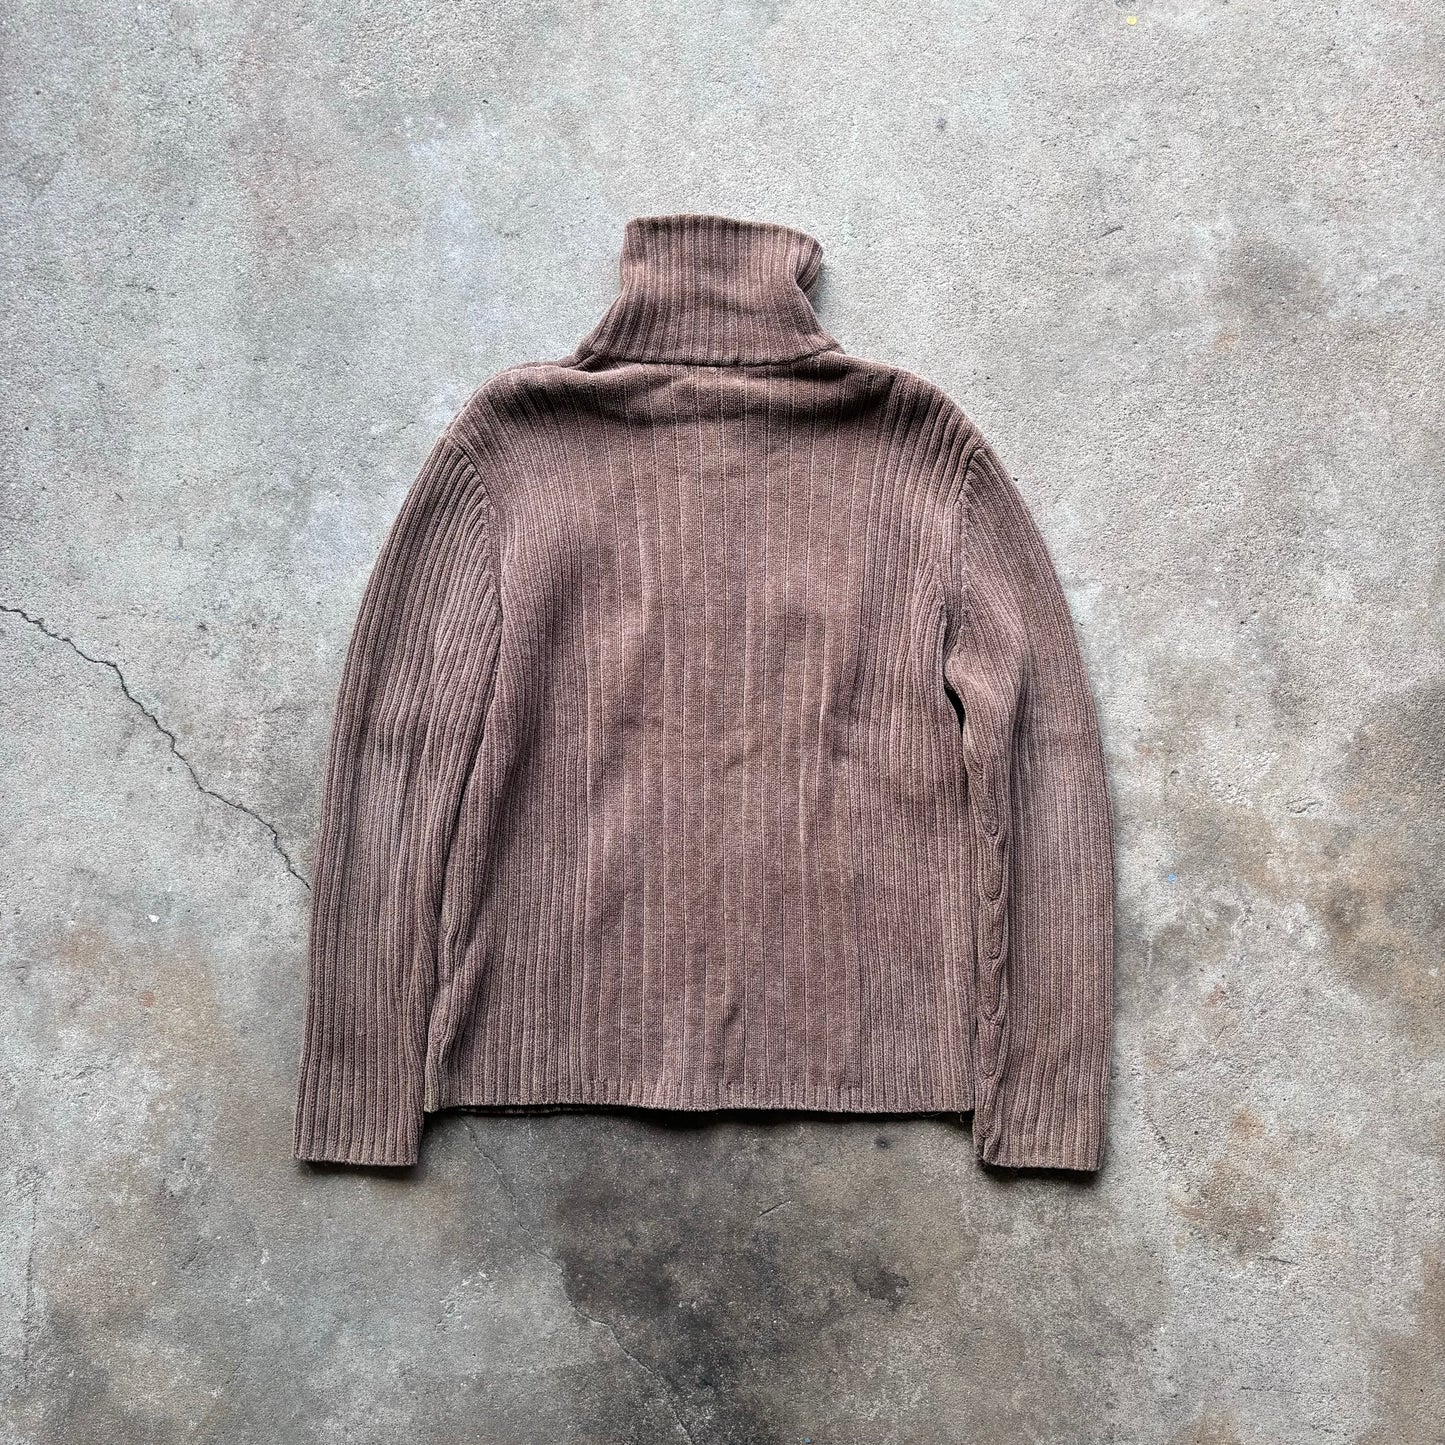 Mossimo Dutte Brown Zip Up Turtle Neck [Large]